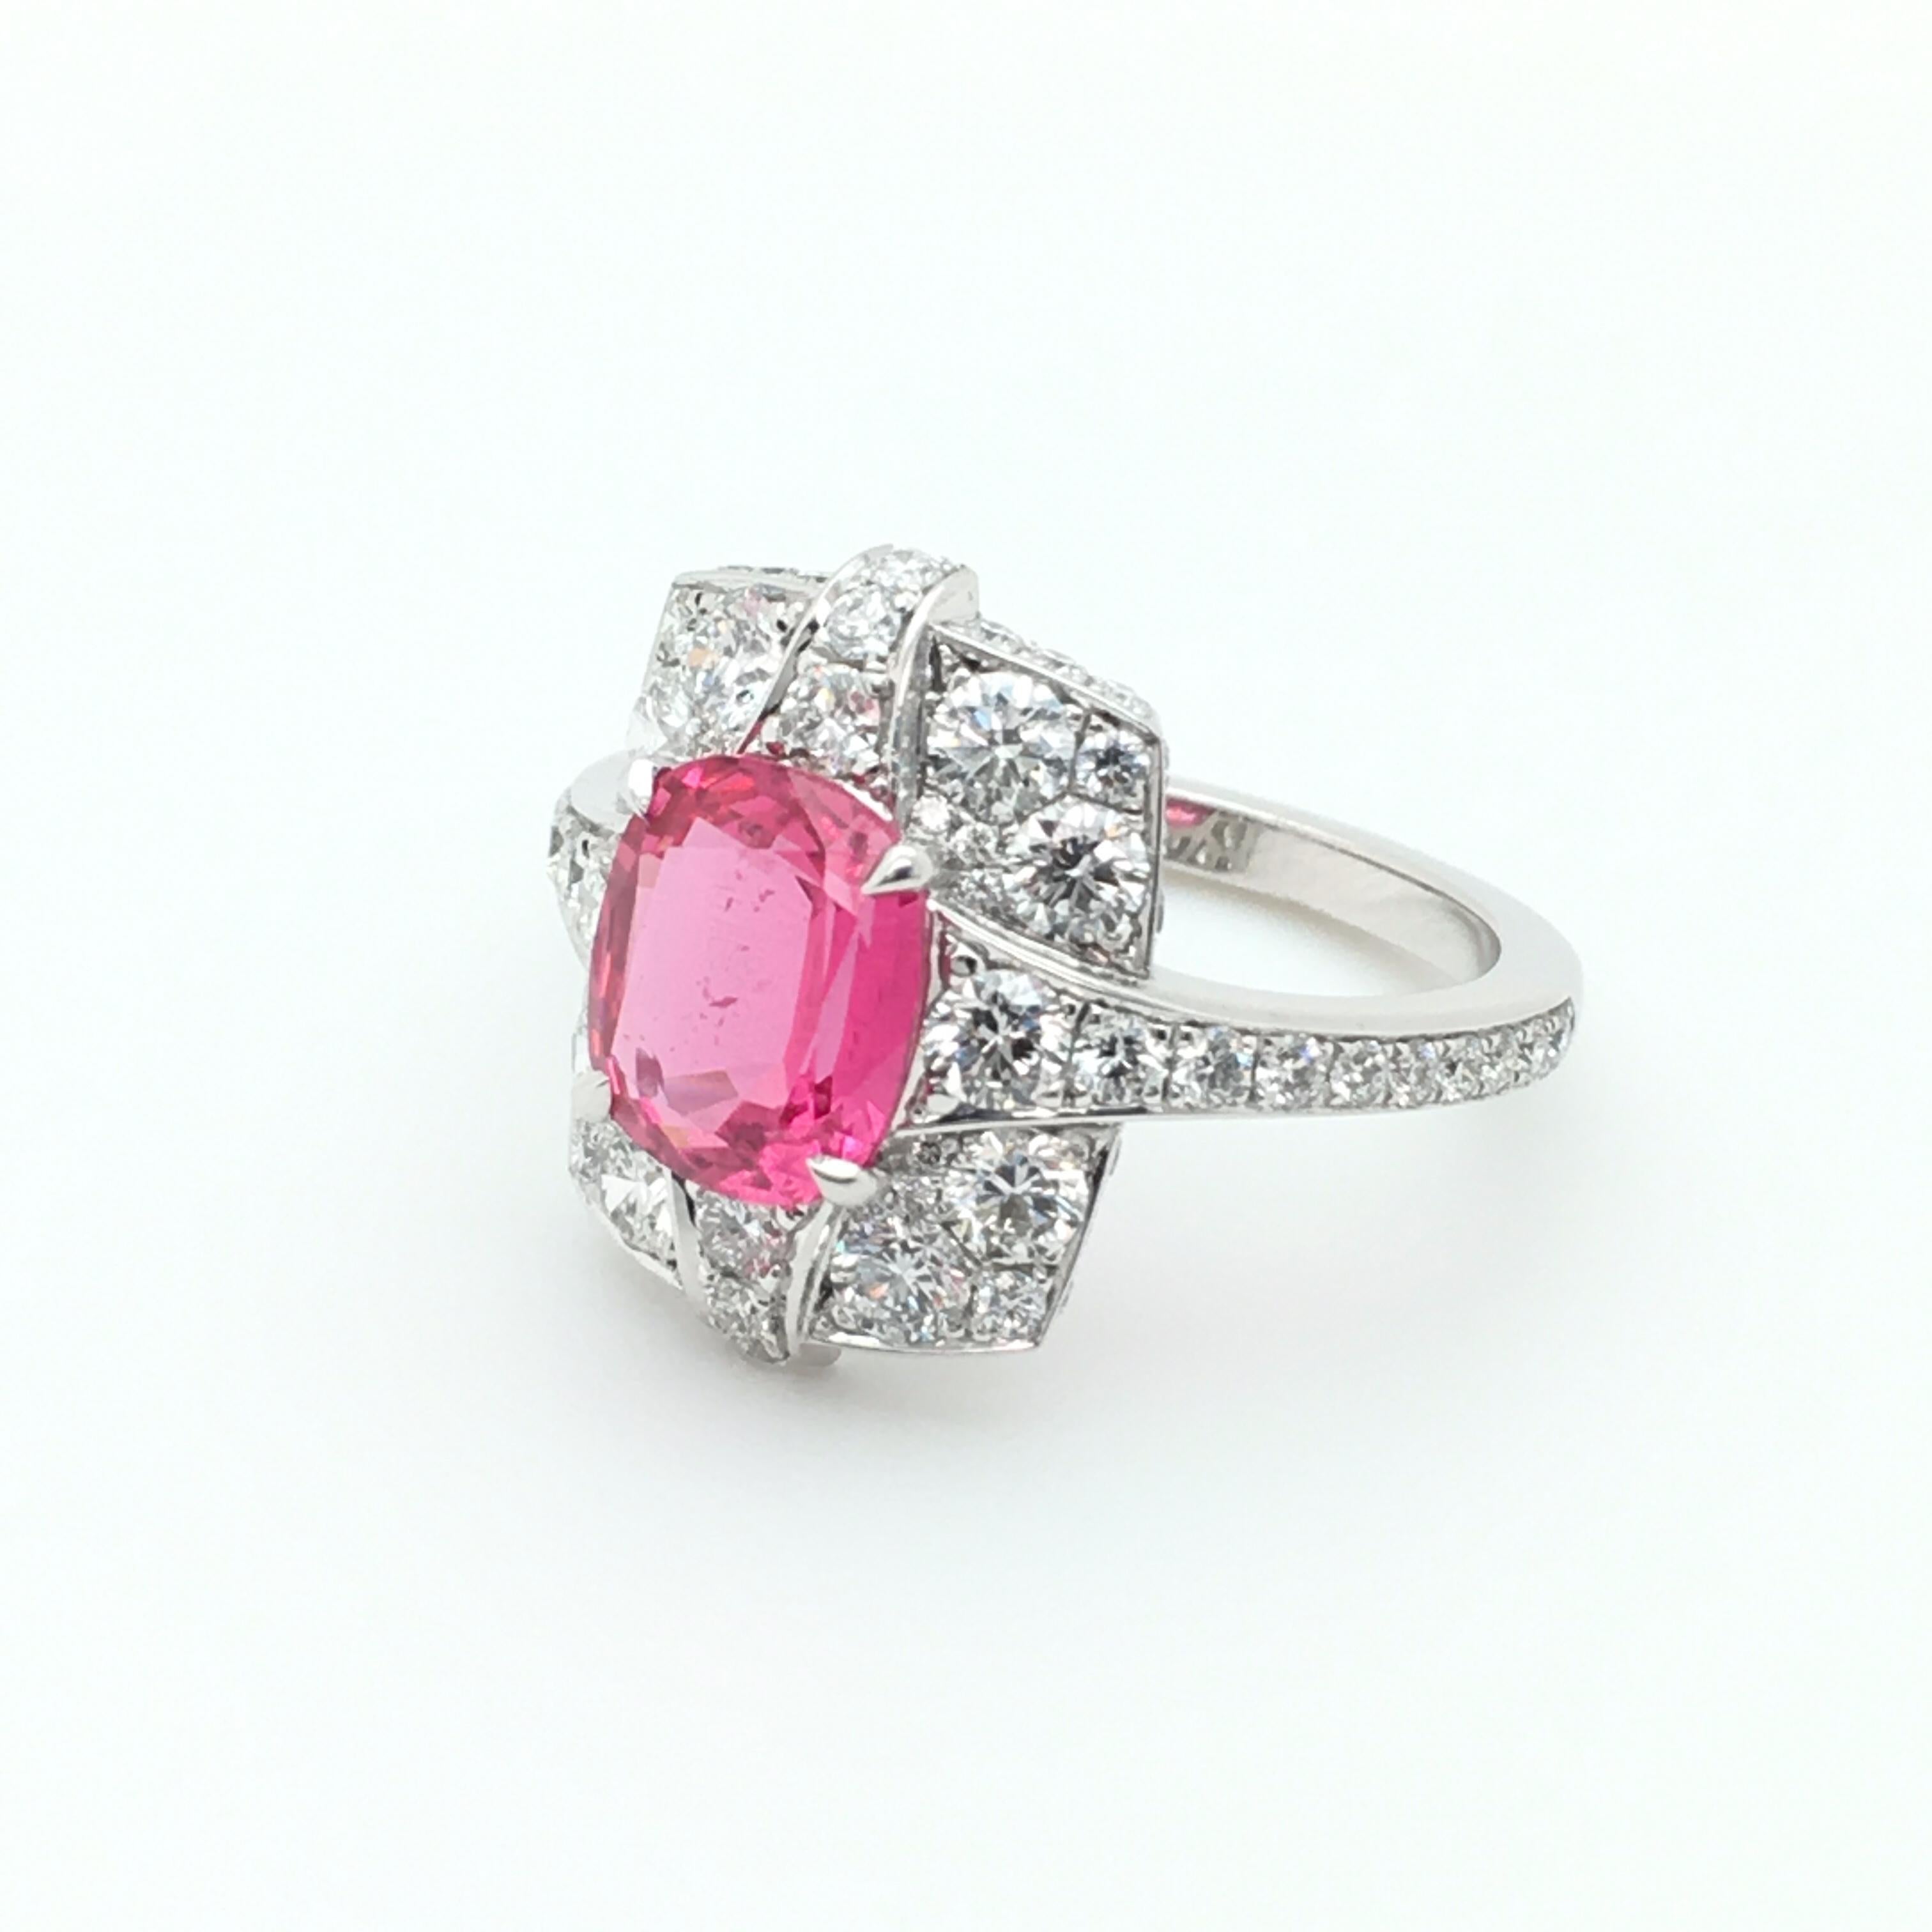 Cushion Cut 2.06 Carat Pink Spinel Cocktail Ring With Diamonds Set In White Gold